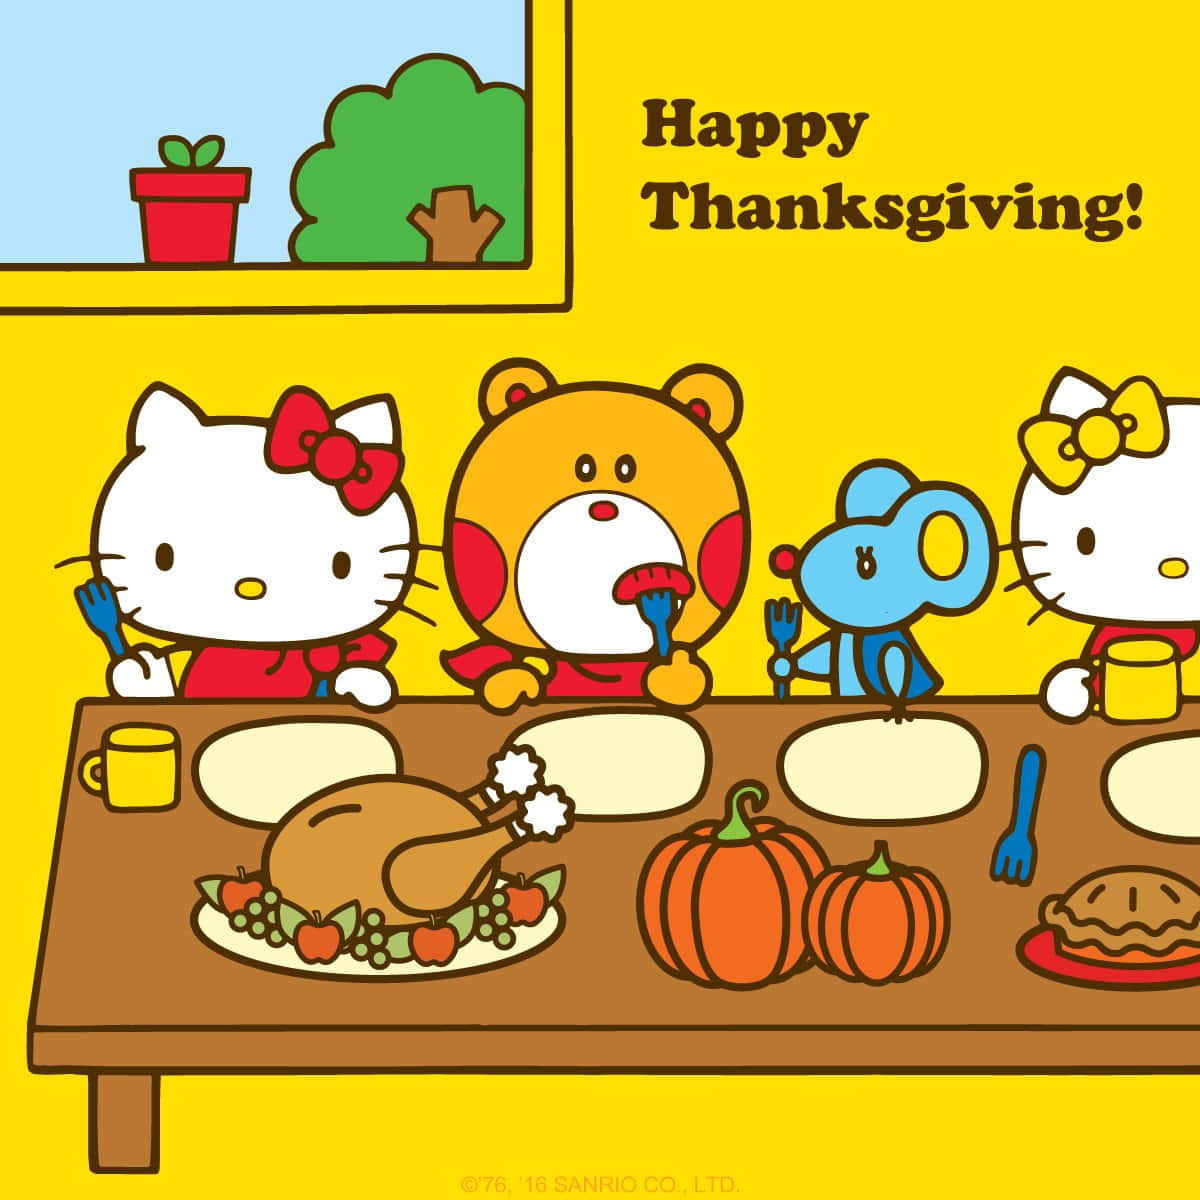 Give Thanks With Hello Kitty This Thanksgiving. Background